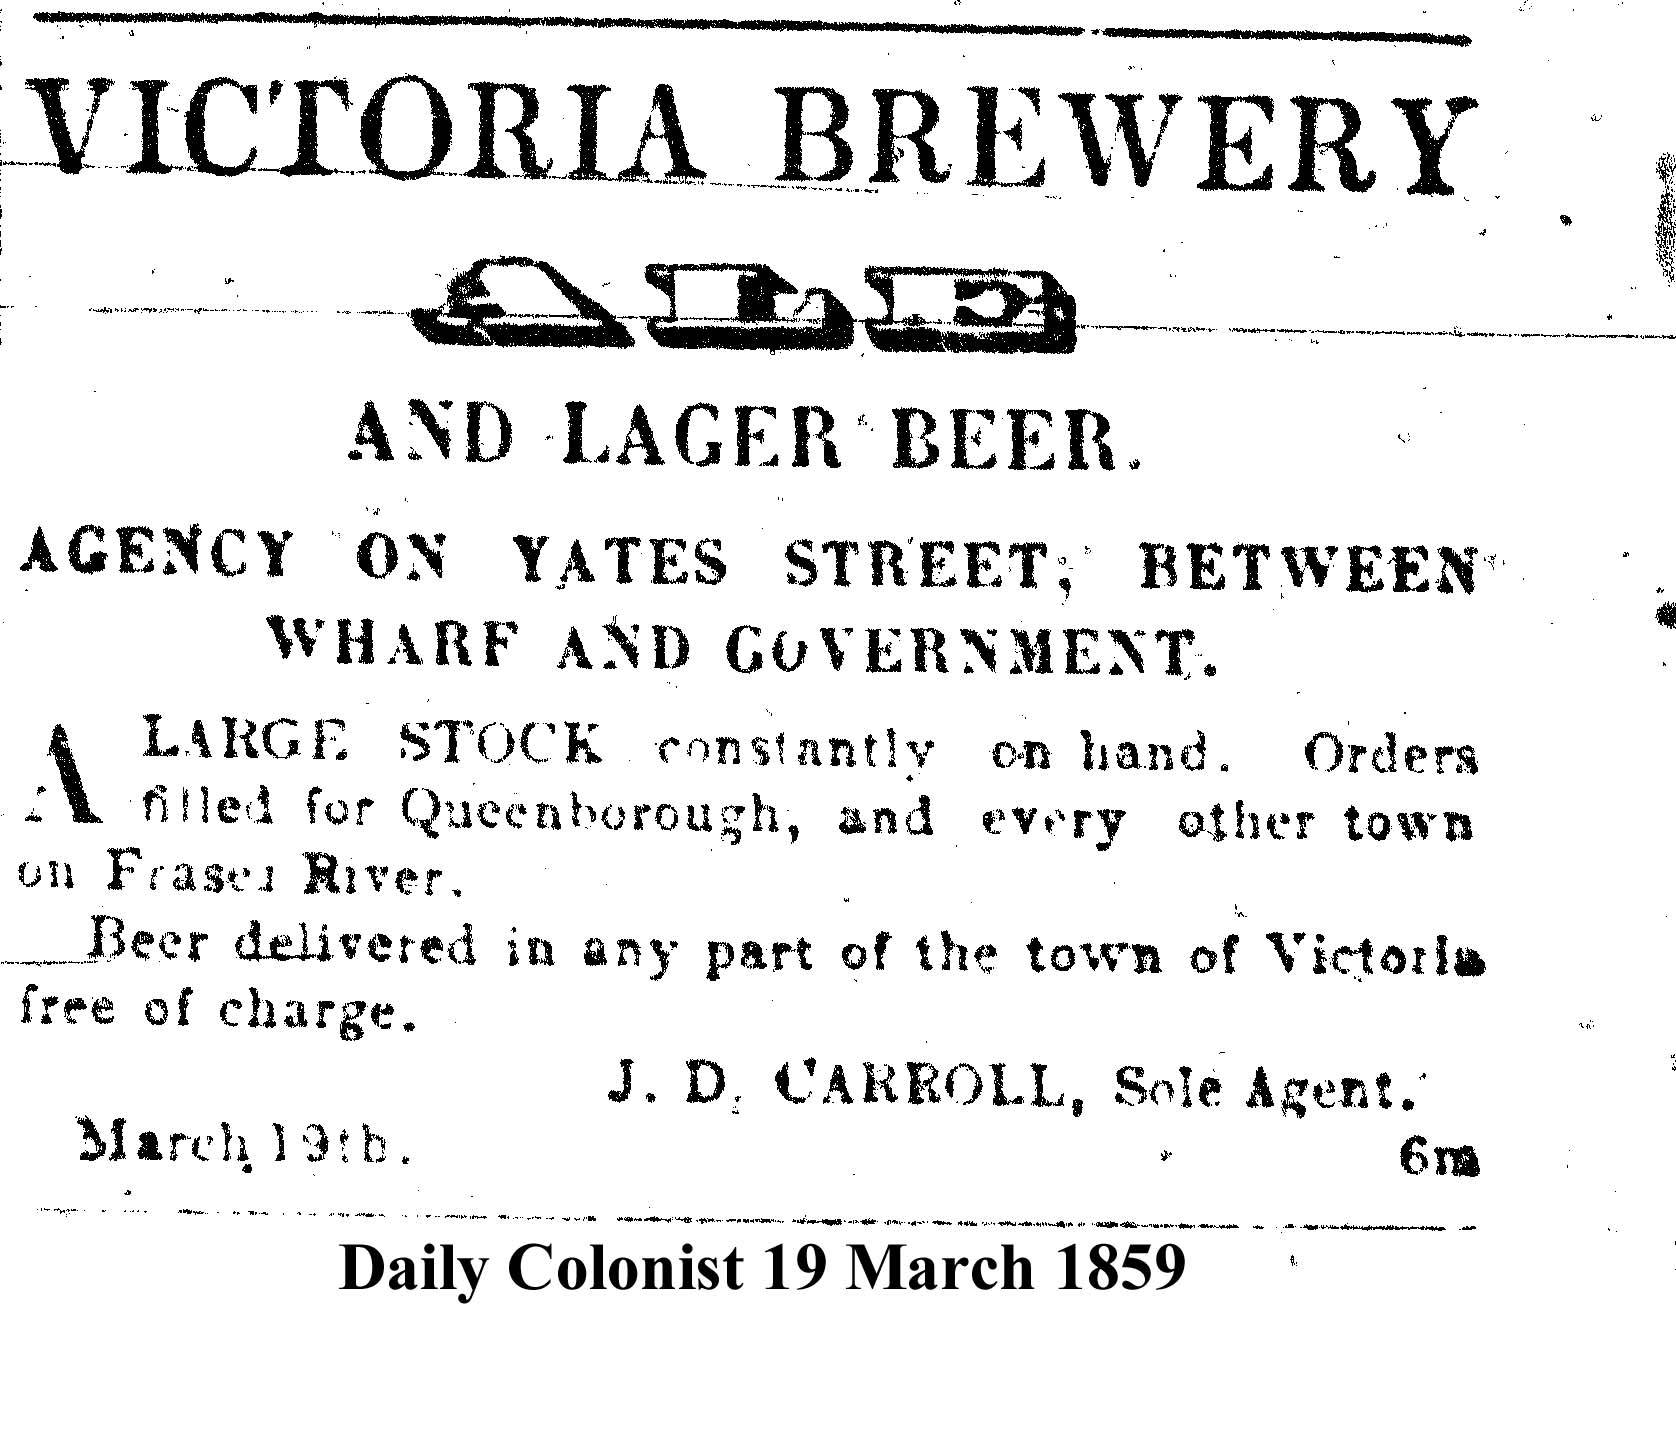 First advertisement for Victoria Brewery March 19, 1859